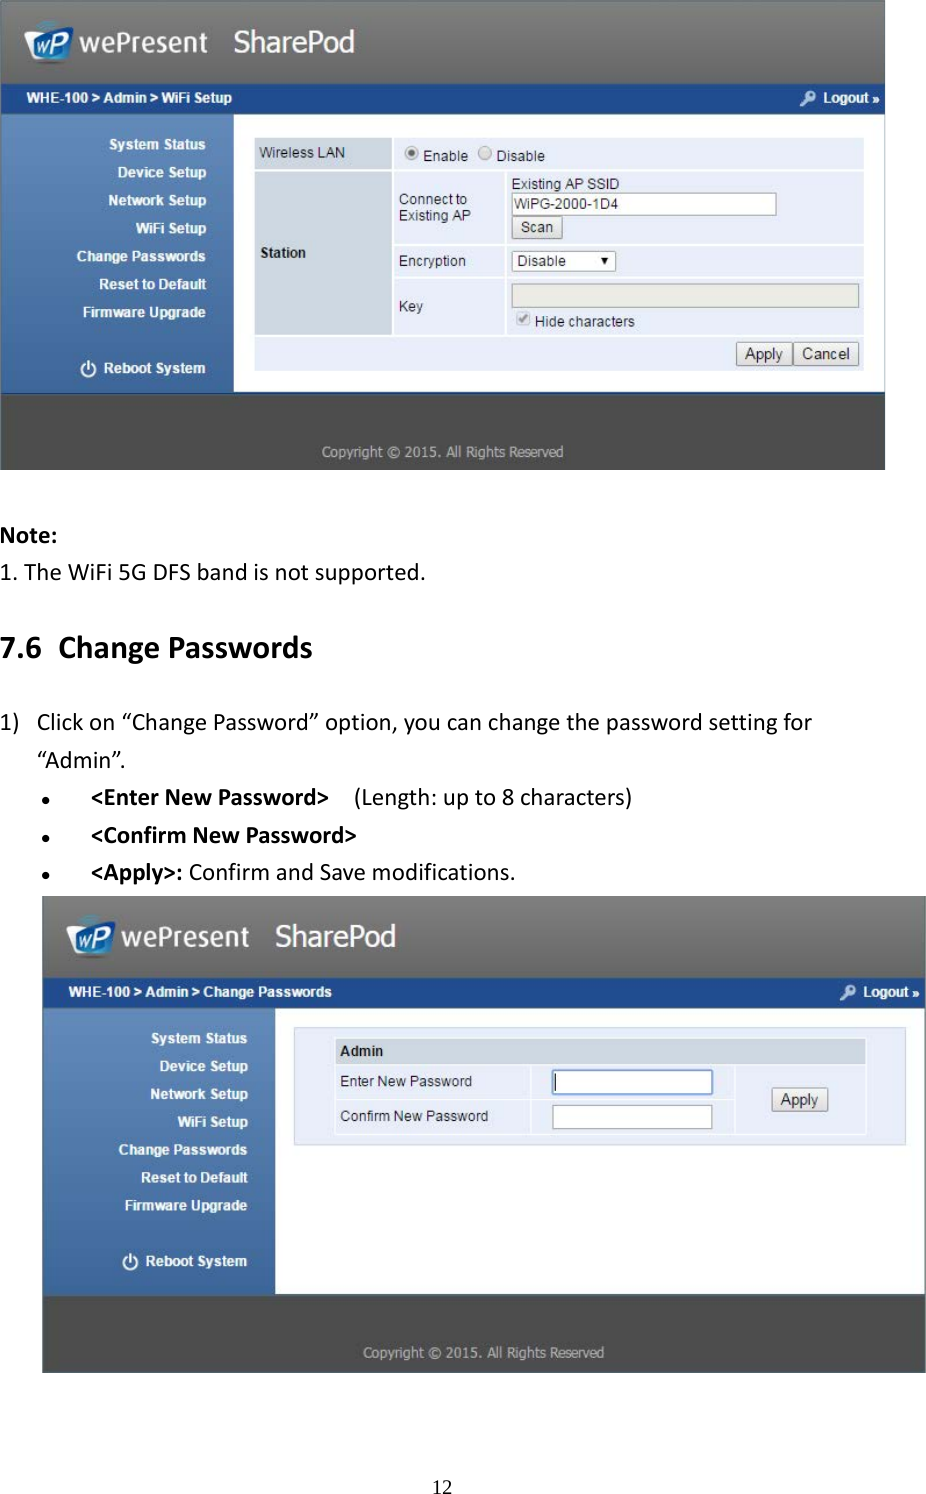   12   Note: 1. The WiFi 5G DFS band is not supported.   7.6 Change Passwords 1) Click on “Change Password” option, you can change the password setting for “Admin”.  &lt;Enter New Password&gt;  (Length: up to 8 characters)  &lt;Confirm New Password&gt;  &lt;Apply&gt;: Confirm and Save modifications.   